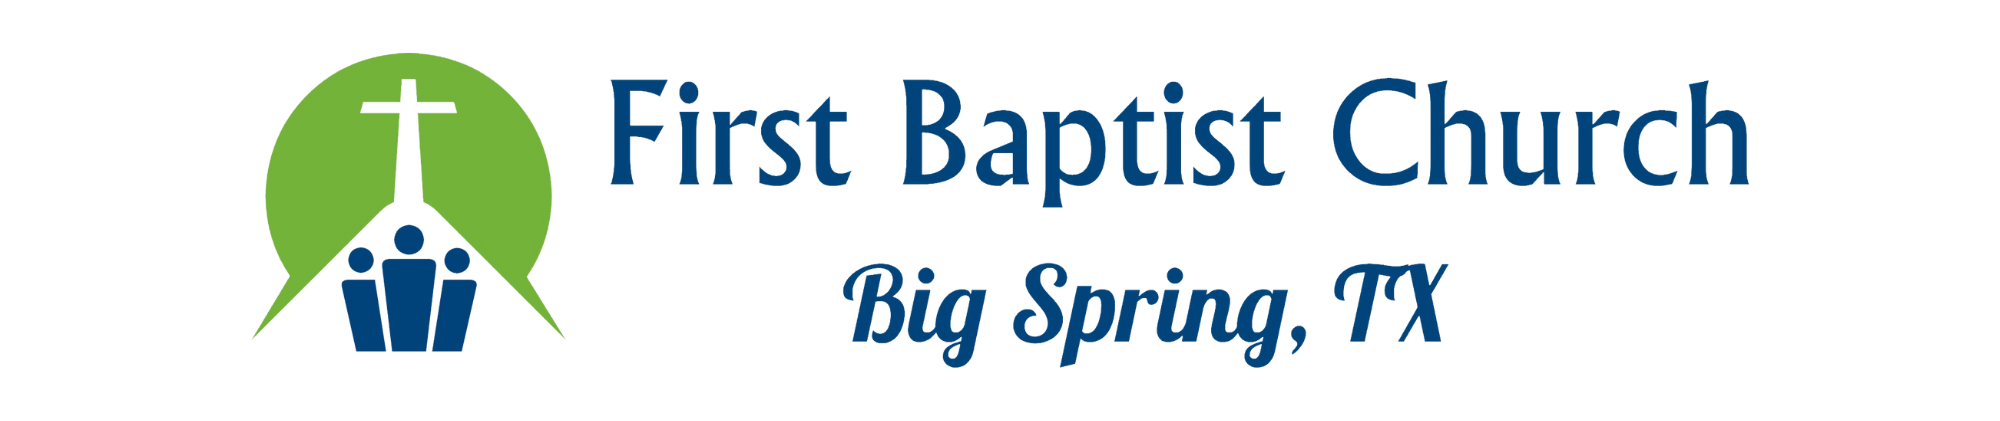 I Will Archives - First Baptist Church Big Spring Tx